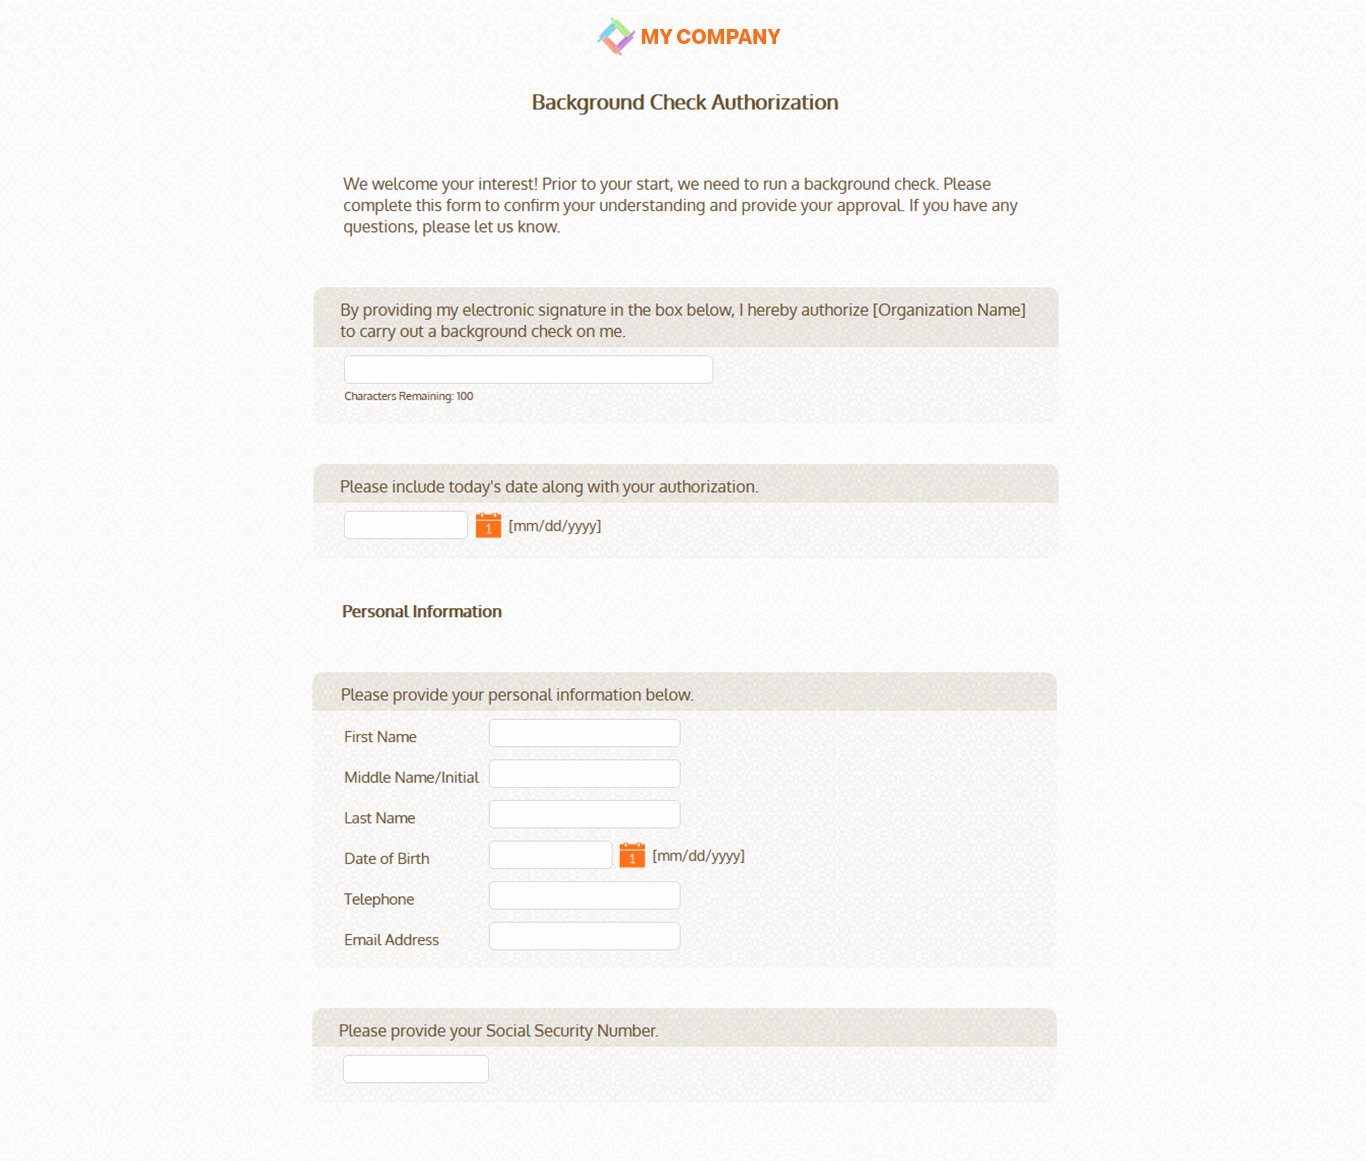 Background Check Authorization form Template Unique [free] Background Check Authorization form Template